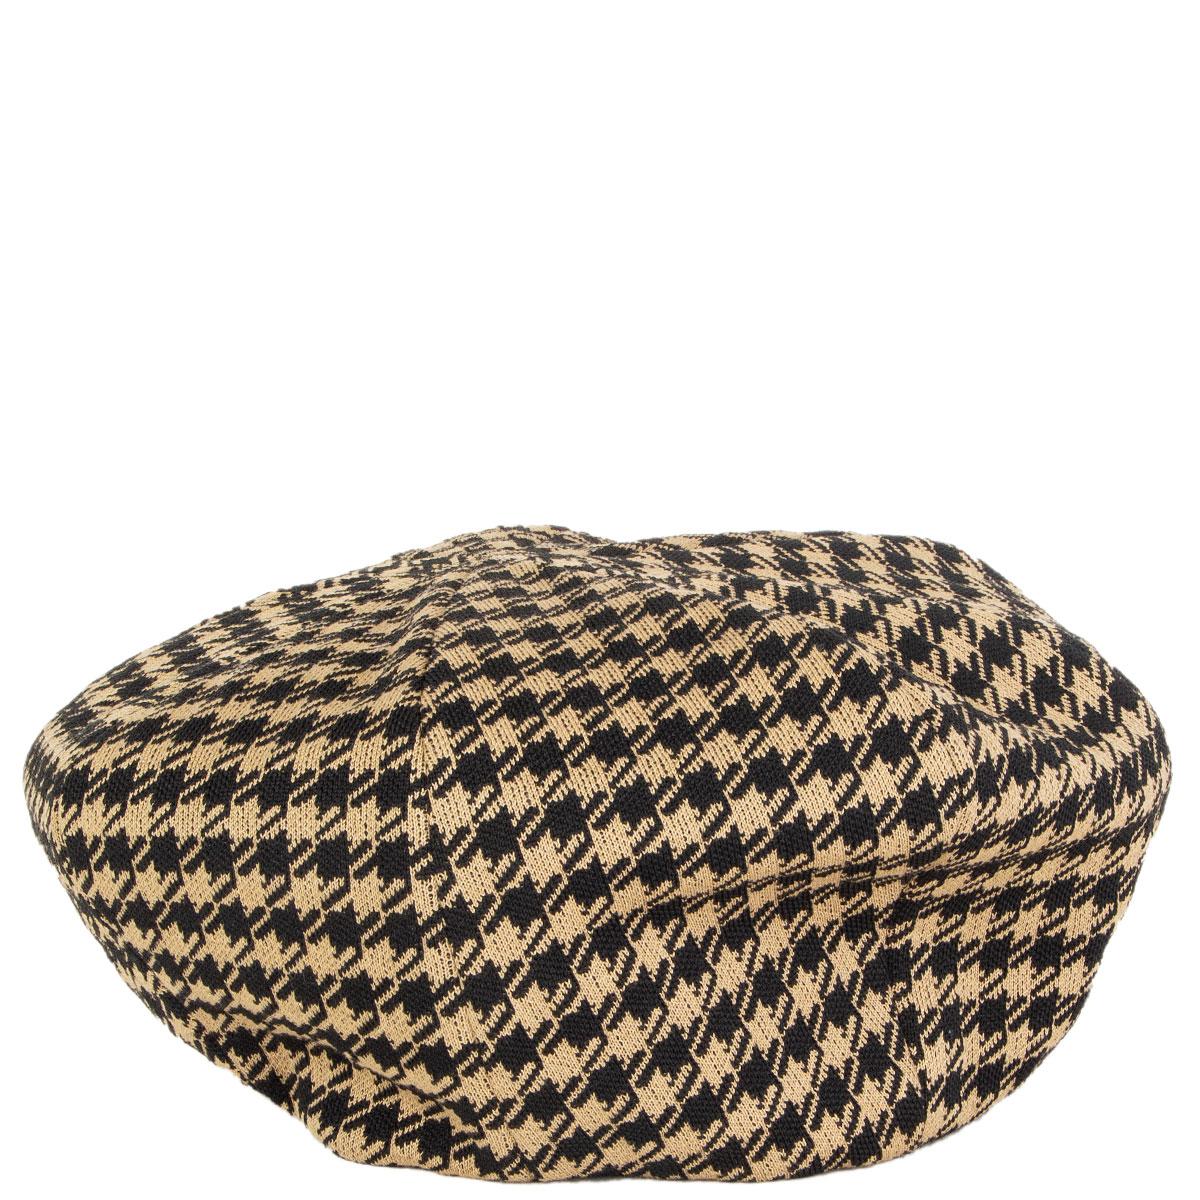 Gucci pied de poule beret in tan and black wool-blenmd (missing tag) and lined in pink silk. Has been worn and is in excellent condition. 

Tag Size 57
Inside Circumference 53cm (20.7in)
